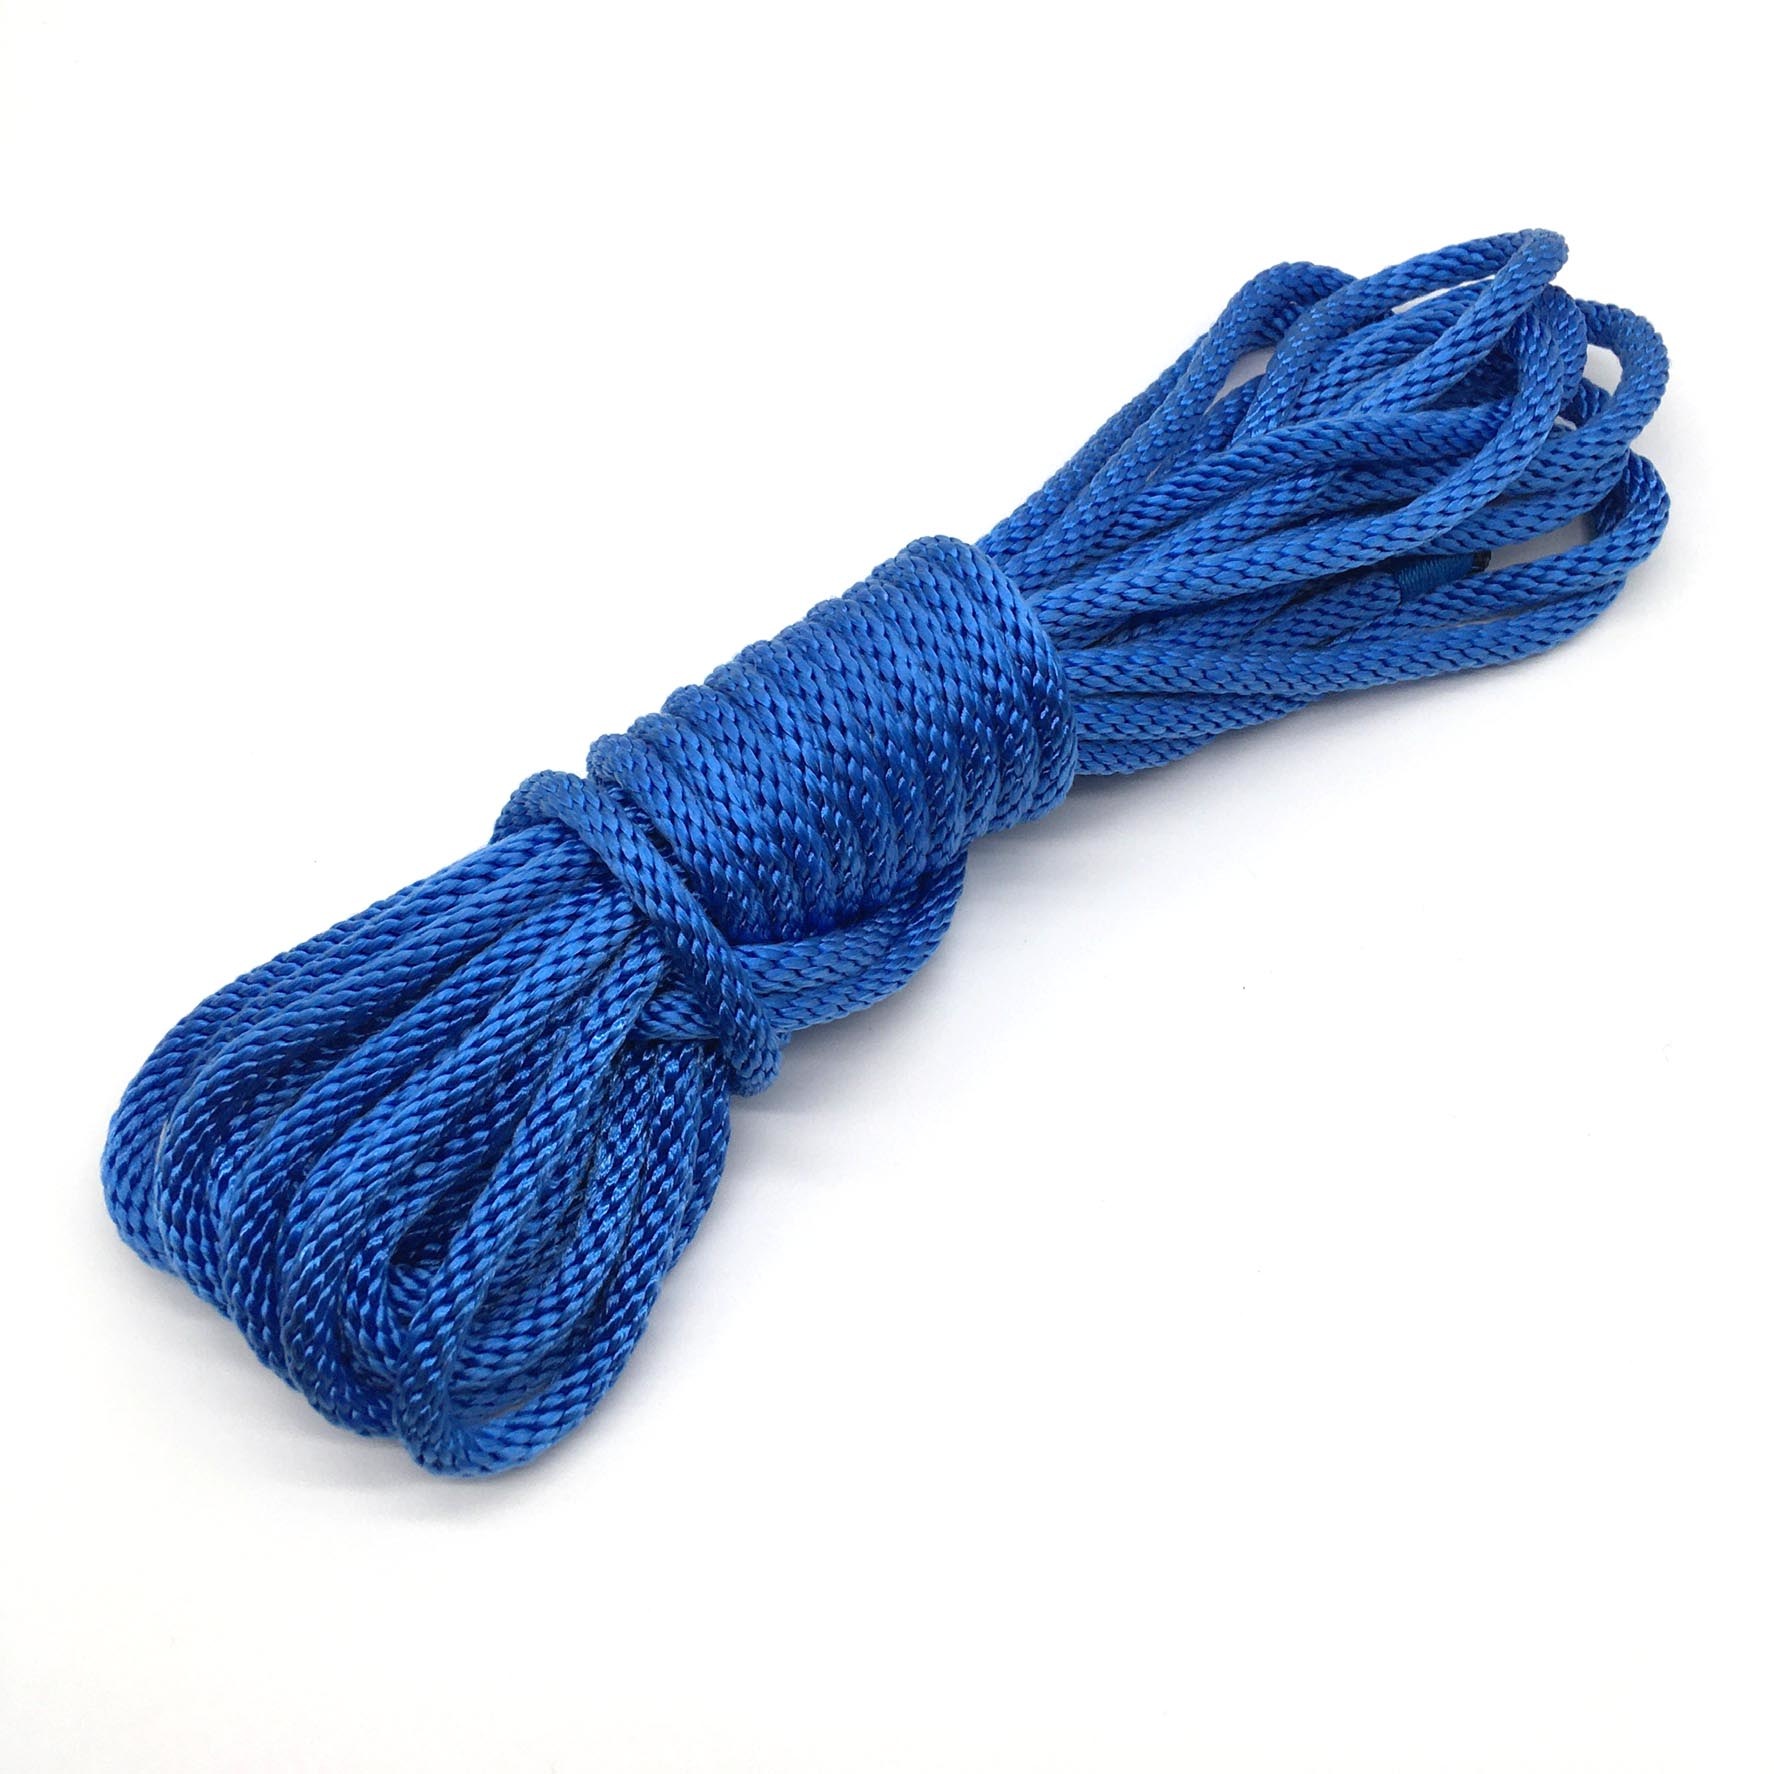 Venus Rope 1/4-inch Solid Braid Nylon Rope - The Tool Shed: An